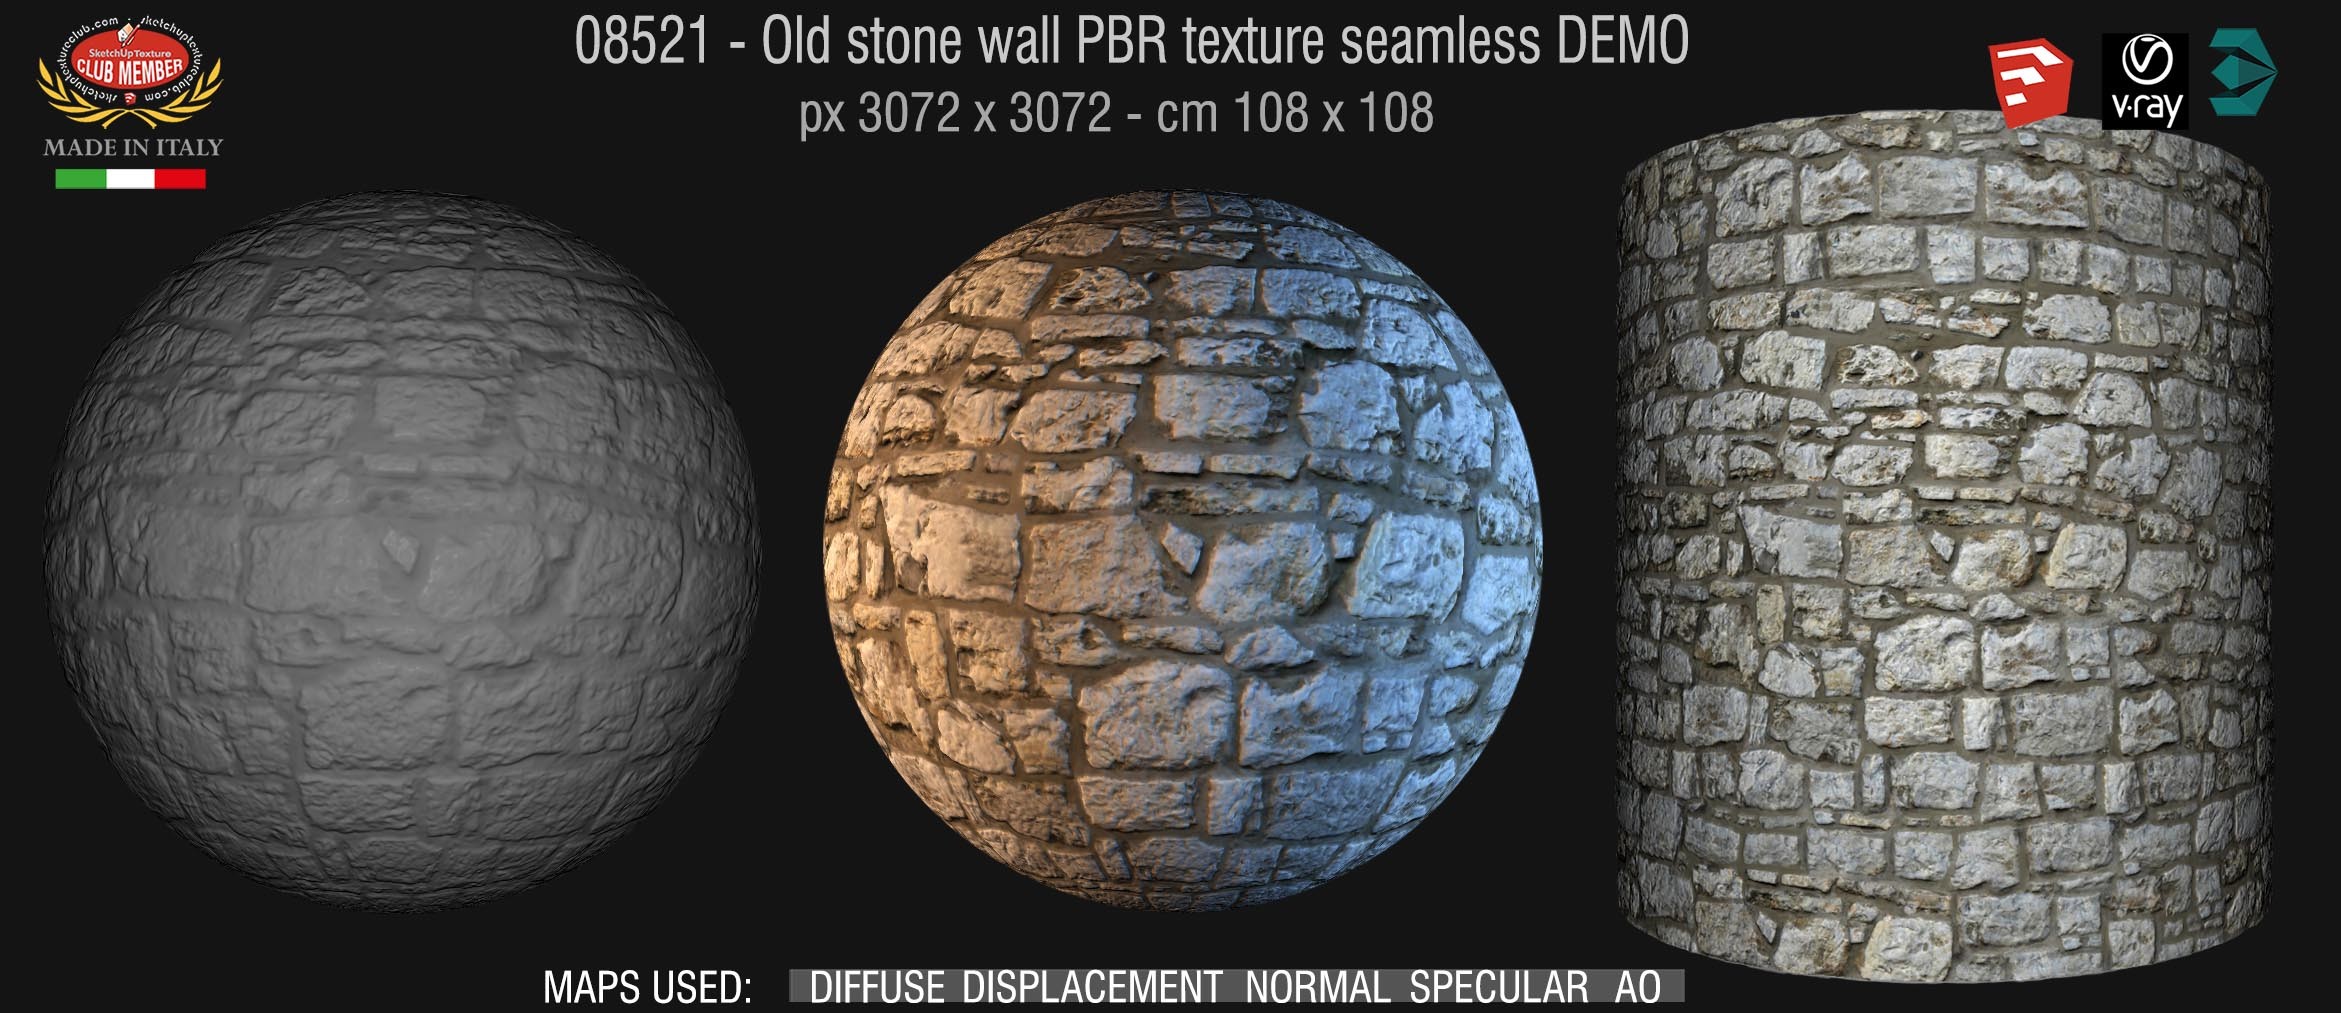 08521 Old stone wall PBR texture seamless DEMO